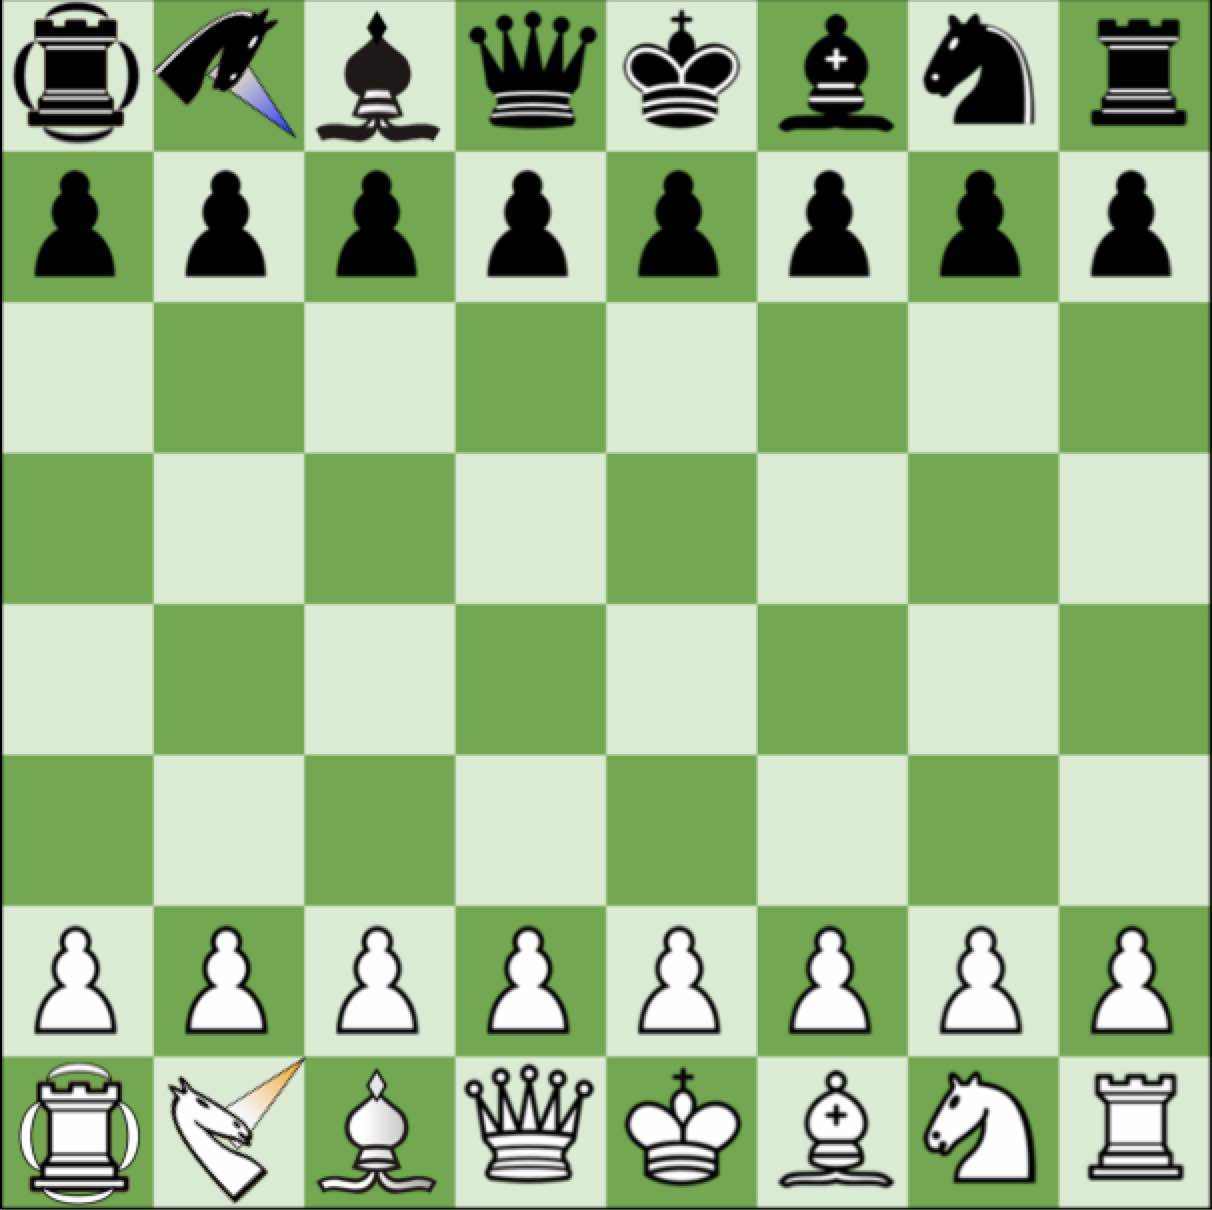 Inspired by chess 960, I created a new chess variant called chess